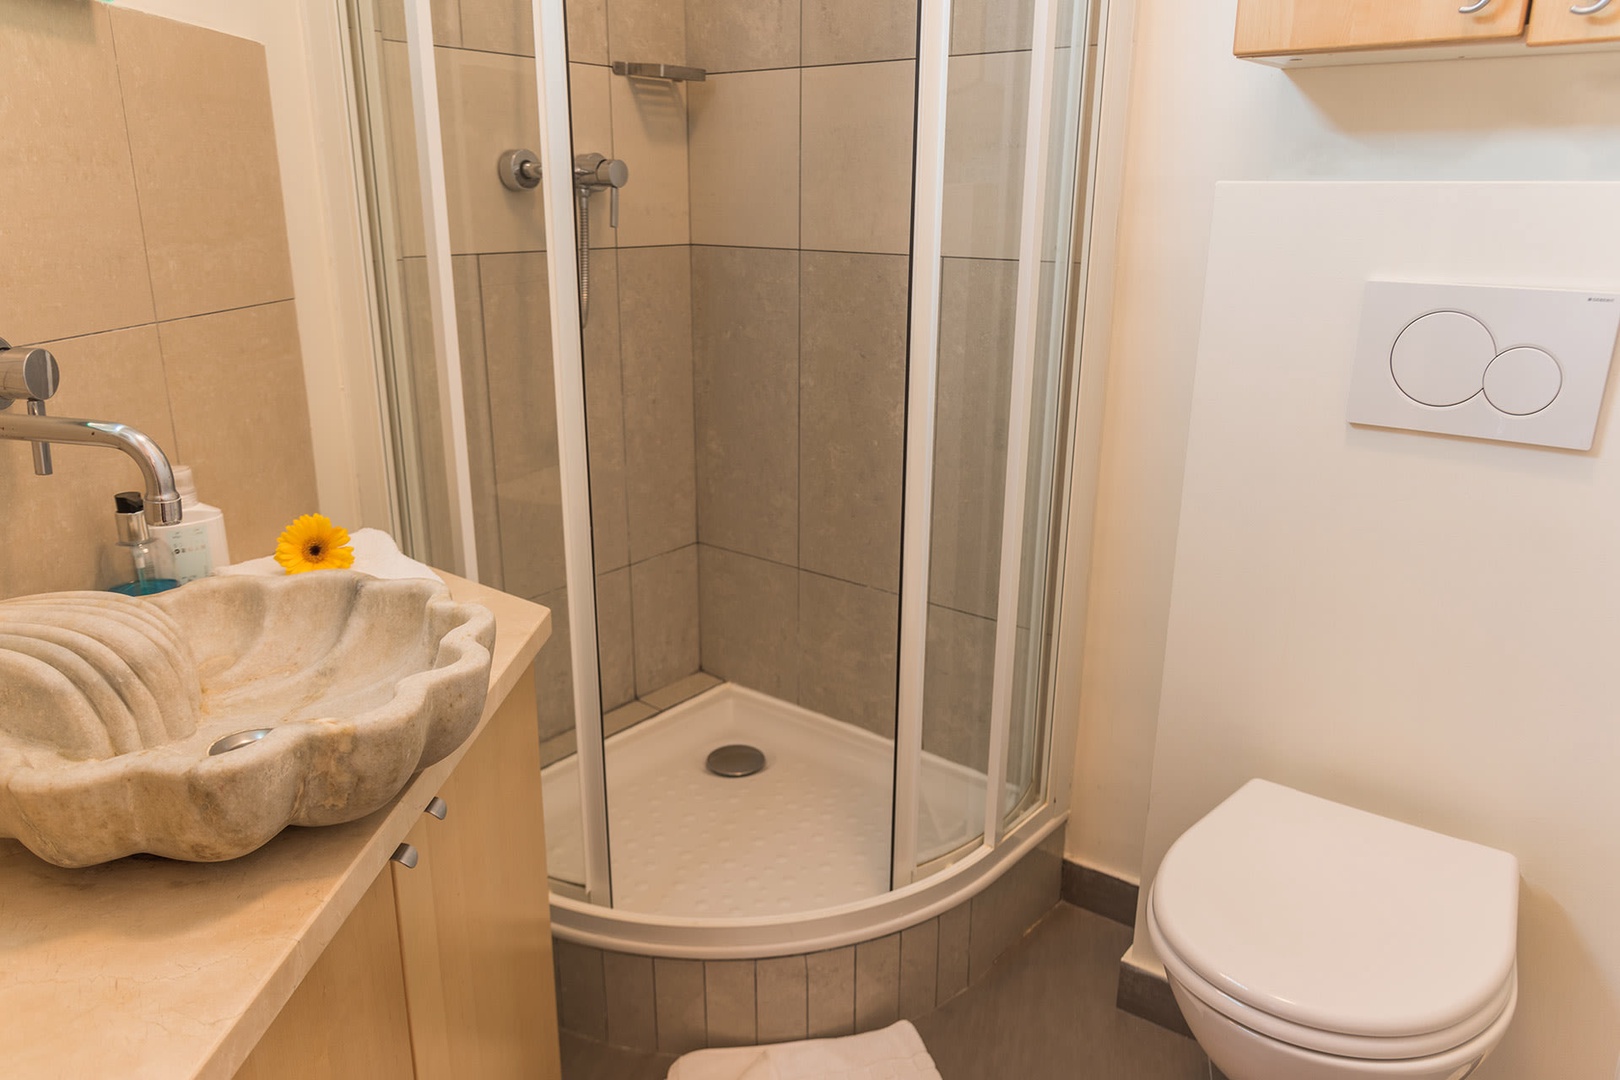 The modern bathroom features a shower, toilet and sink.